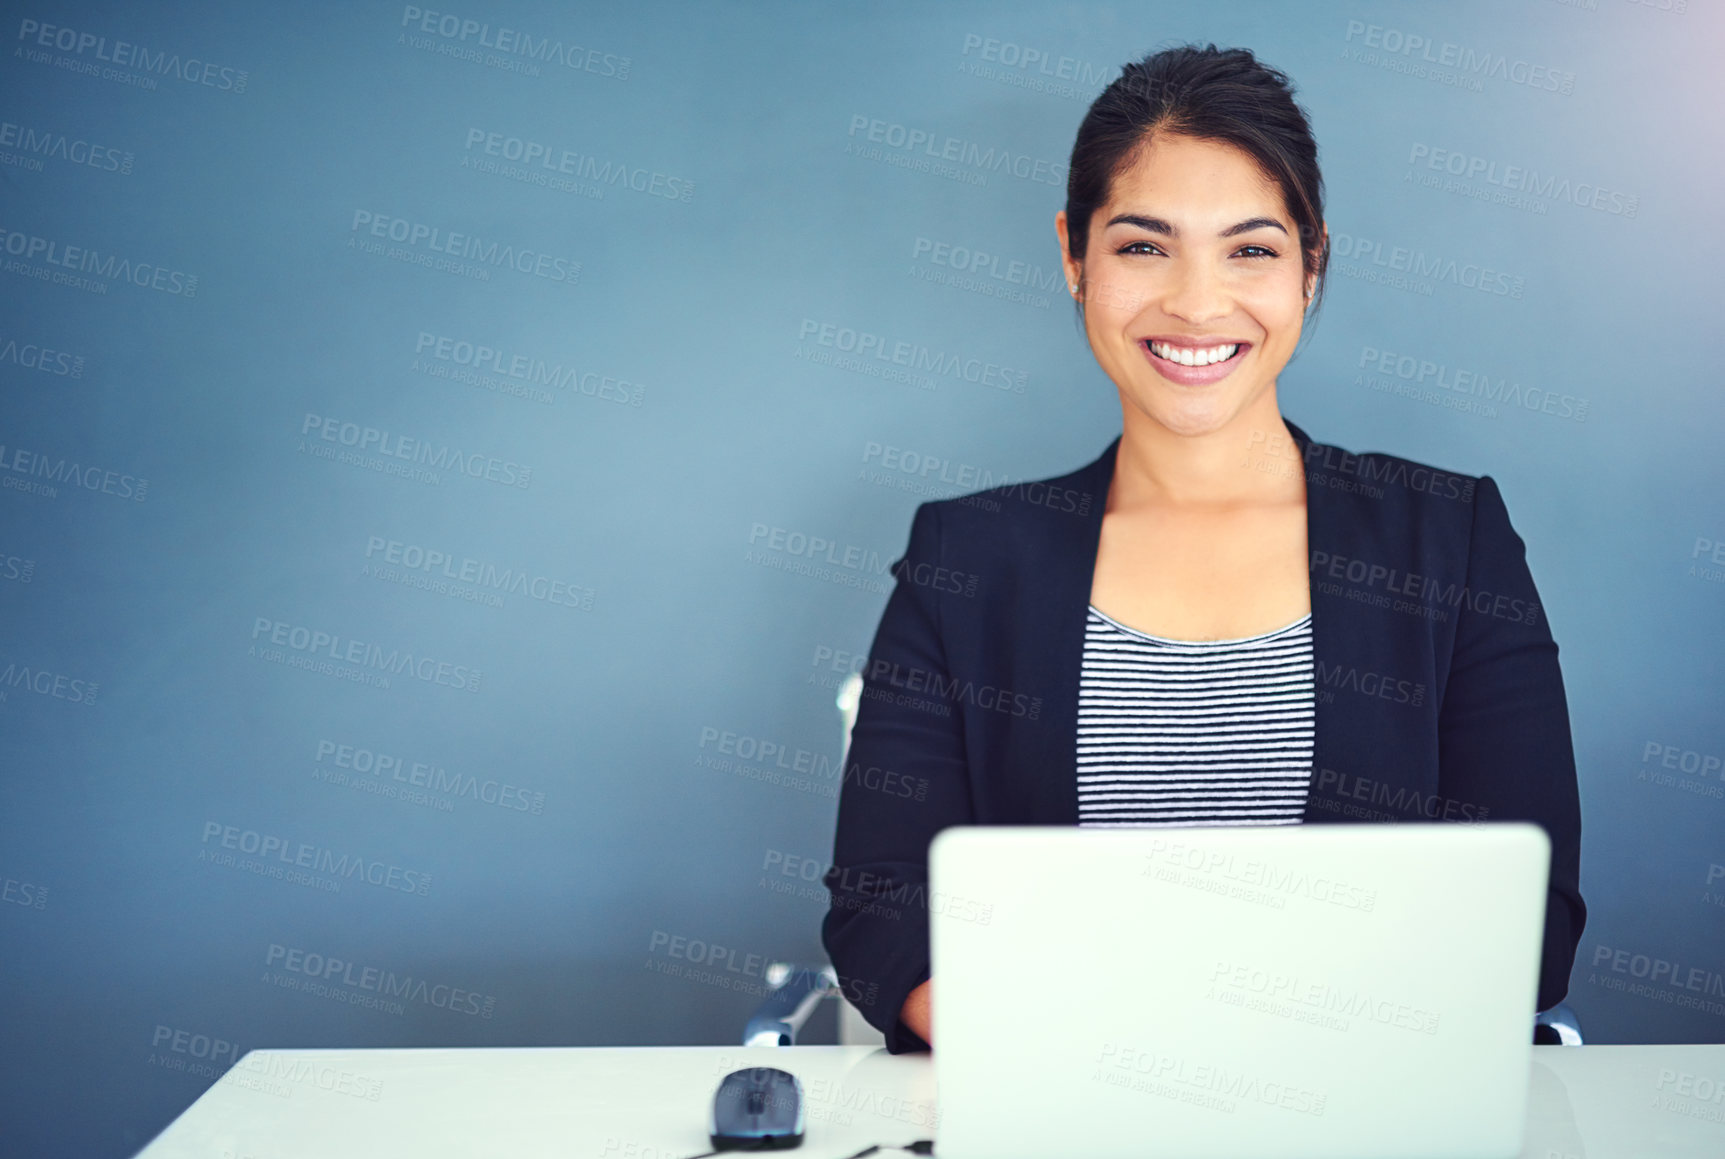 Buy stock photo Shot of a young businesswoman working at her desk